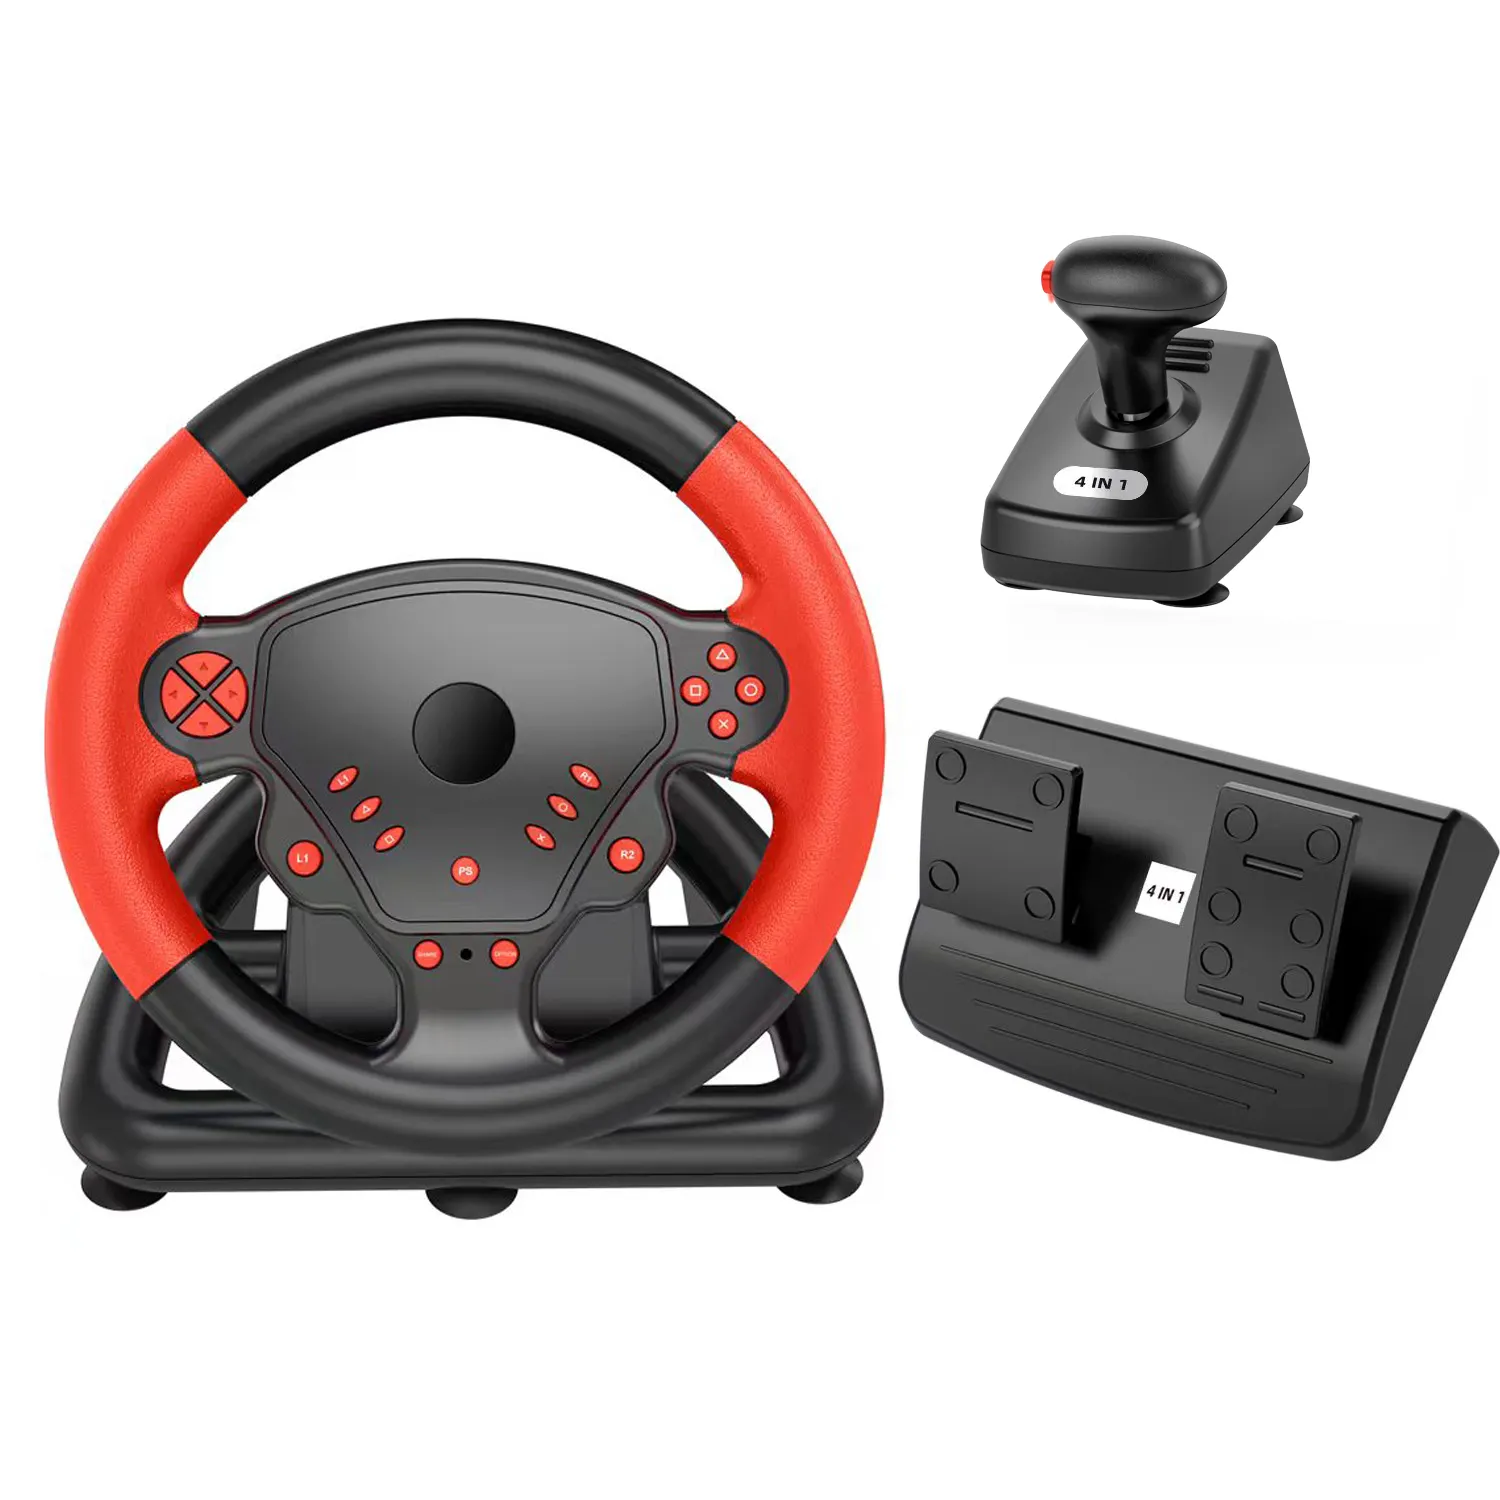 Multi function 4 in 1 vibration Gaming Game Steering Wheel Explosive Steering Wheel for P3/P4/Android/PC